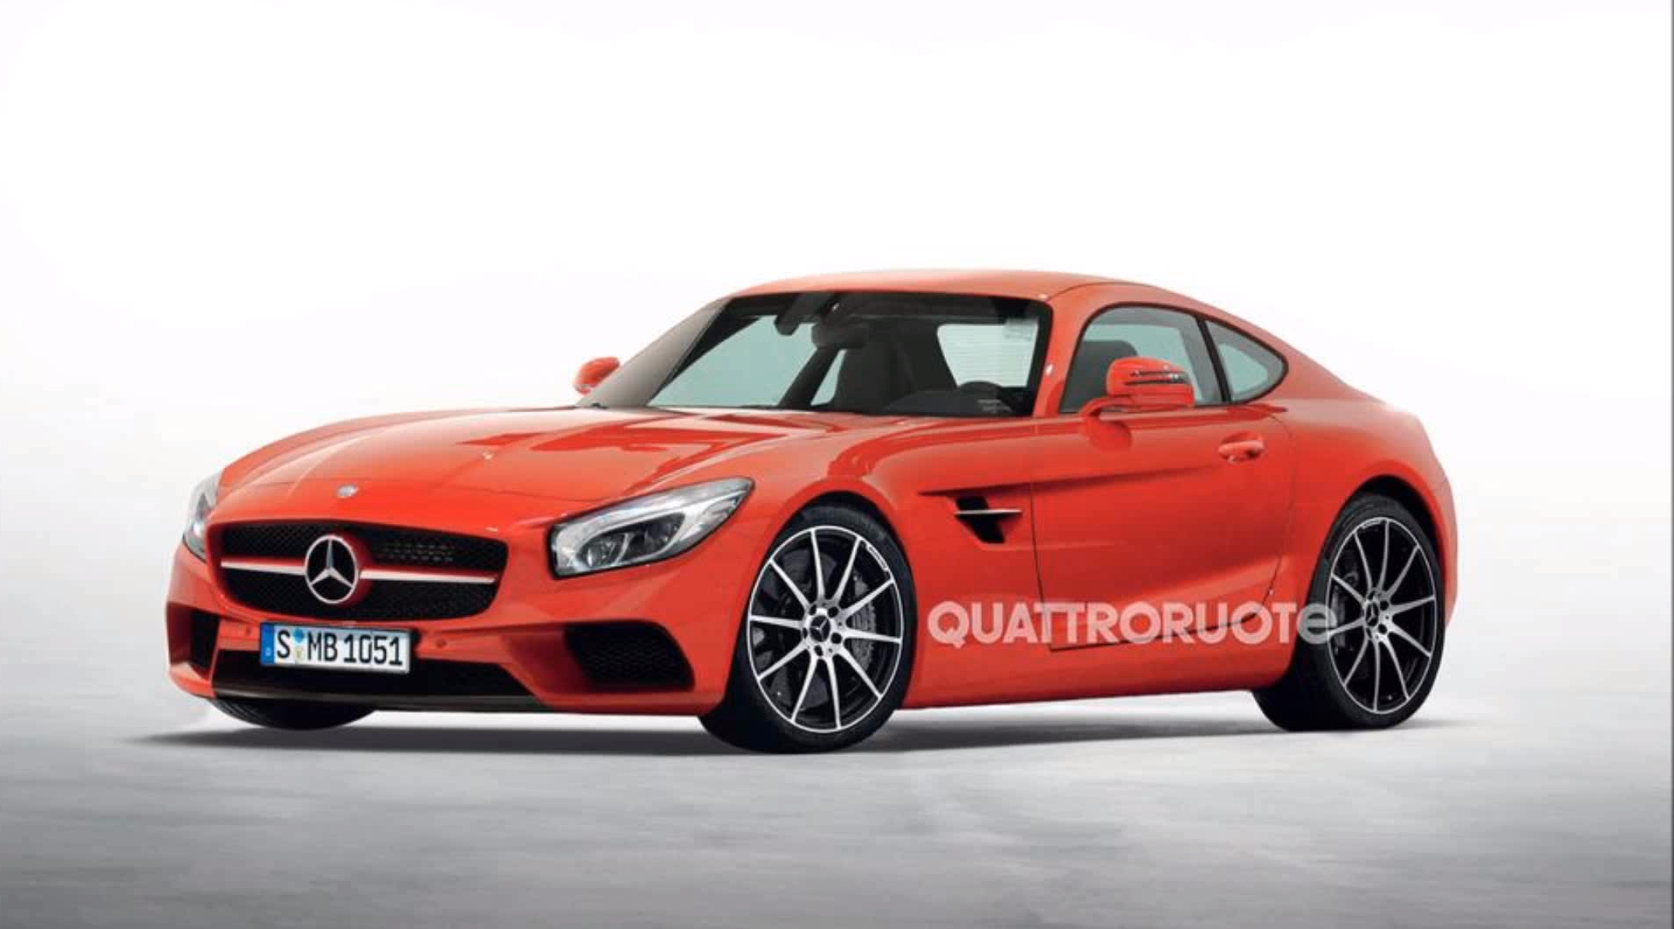 Amg Gt 2016 Price | 2015 Best Auto Reviews